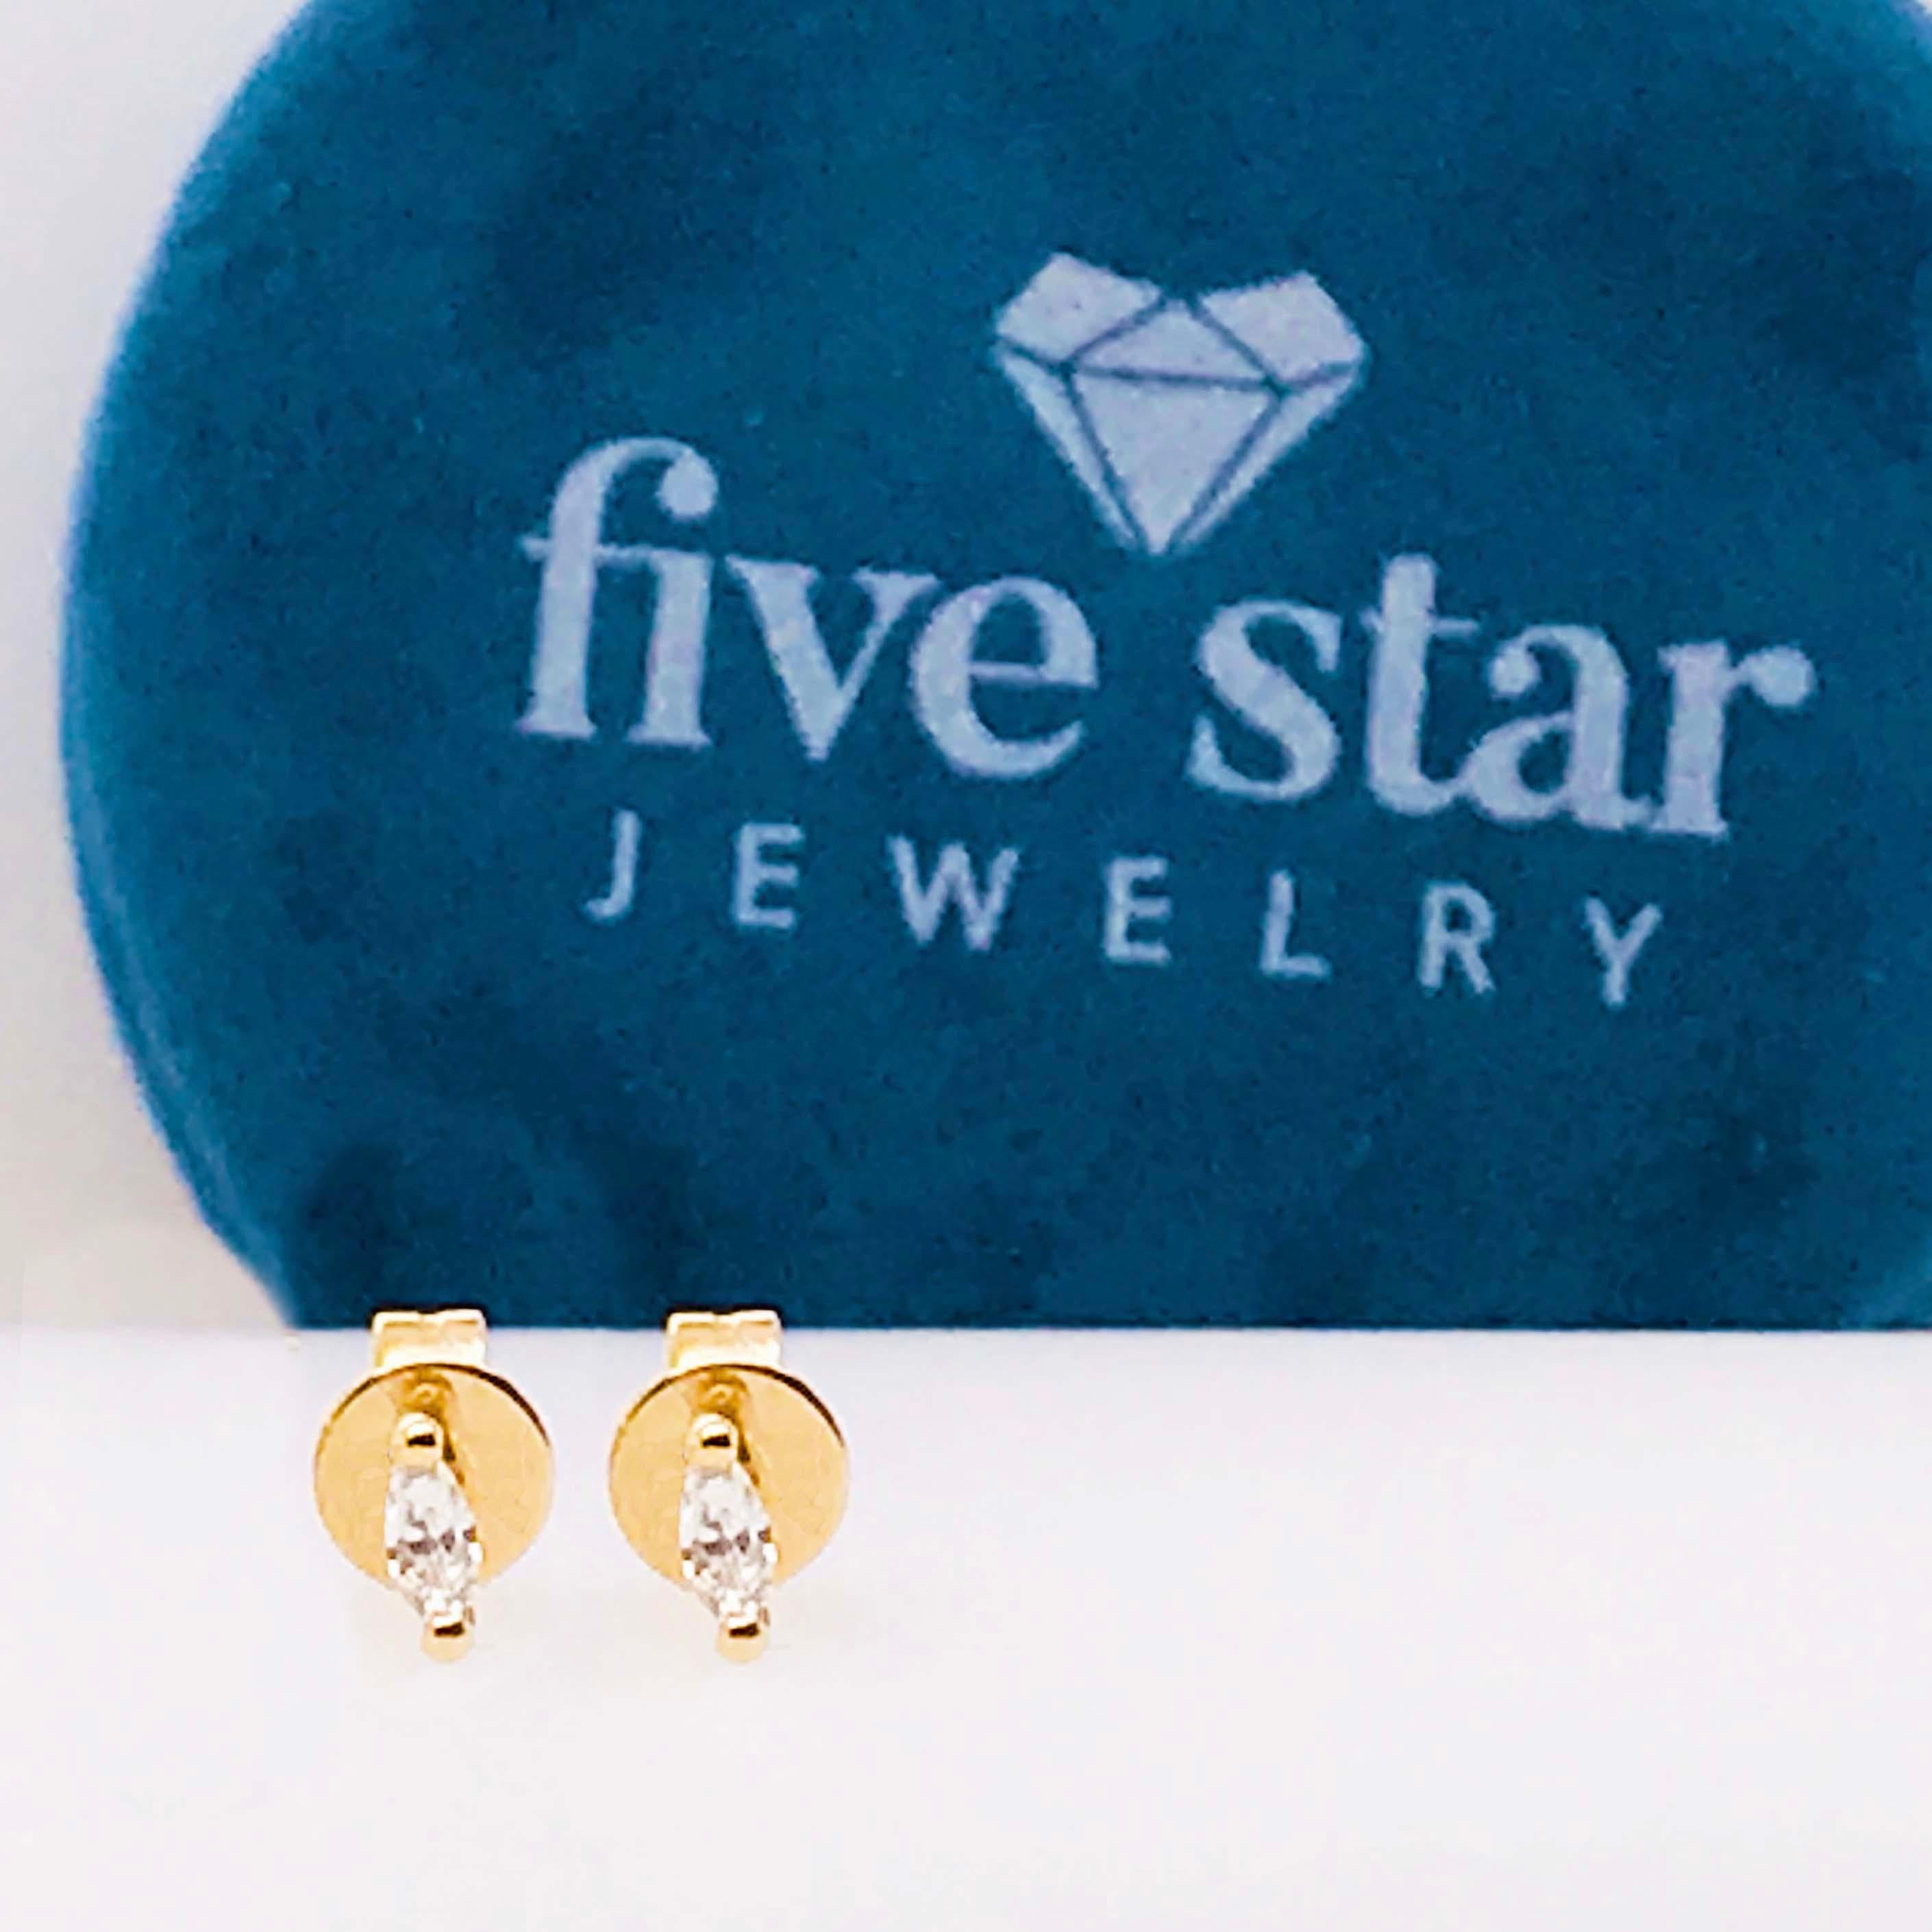 These marquise diamond solitaire earring studs are the perfect everyday studs! With a genuine marquise shaped diamond set in a two prong solitaire setting in the earring. The earrings are 14k yellow gold. Diamond stud earrings are a staple in fine